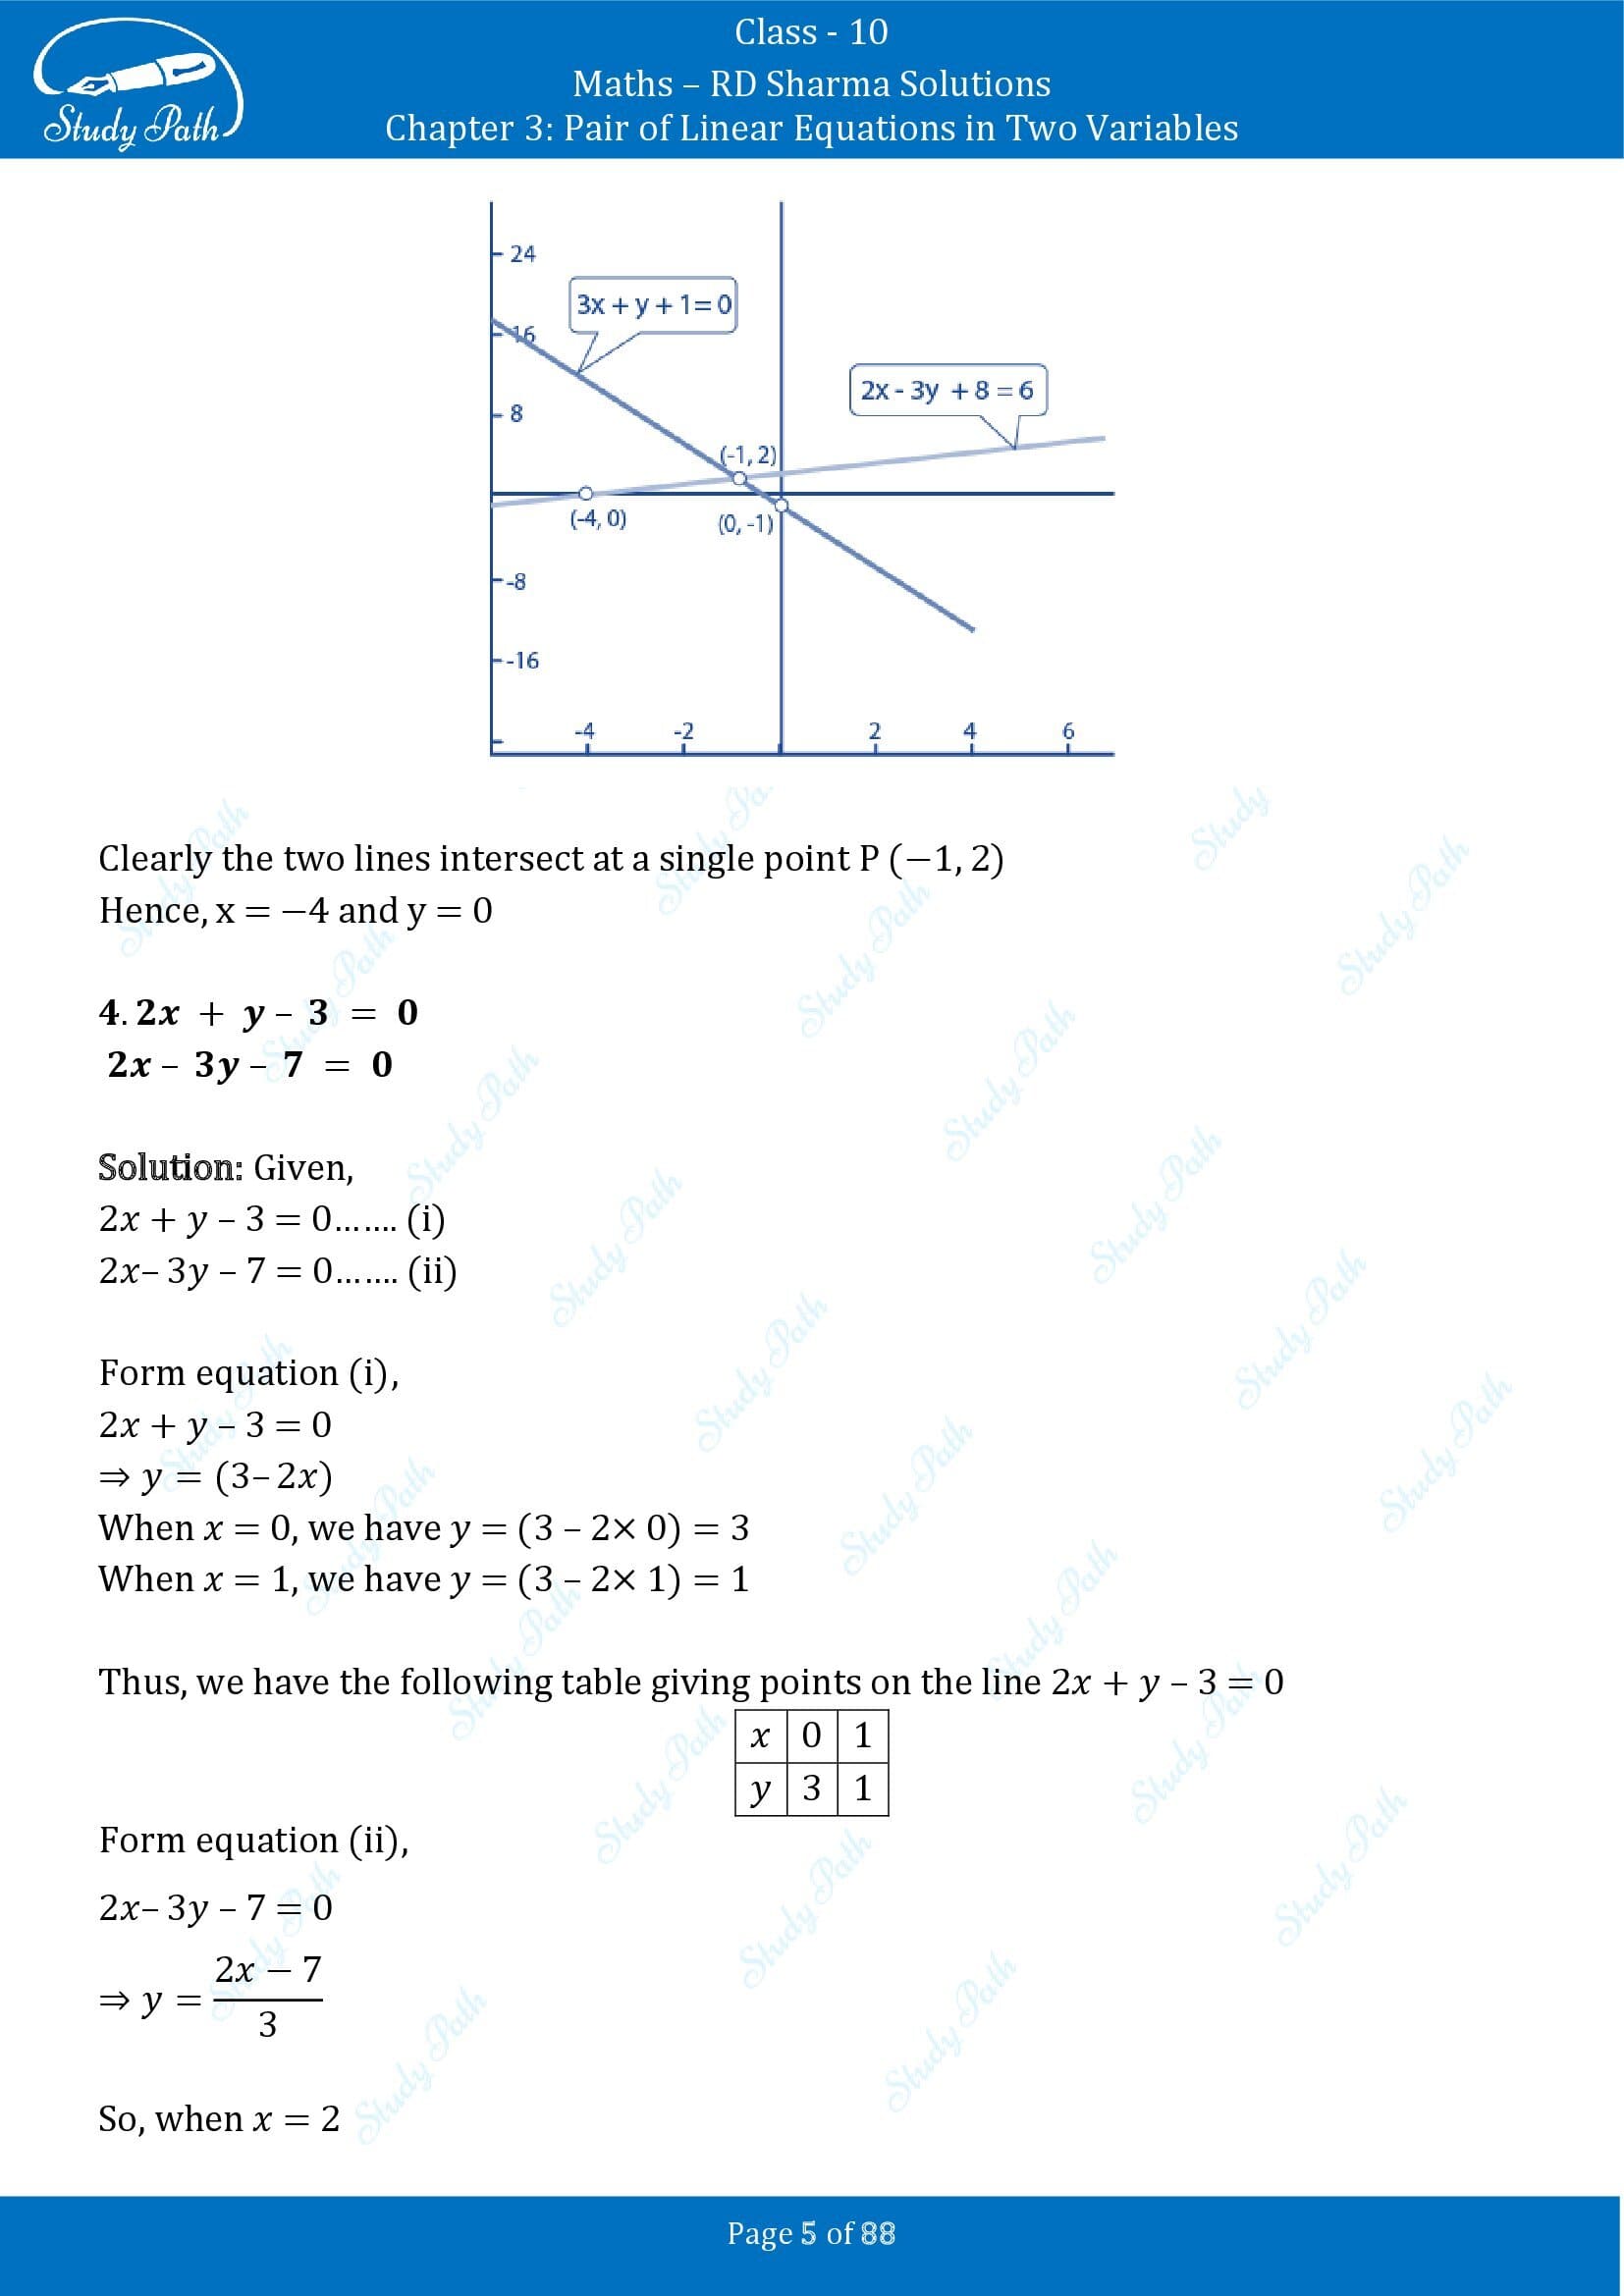 RD Sharma Solutions Class 10 Chapter 3 Pair of Linear Equations in Two Variables Exercise 3.2 00005